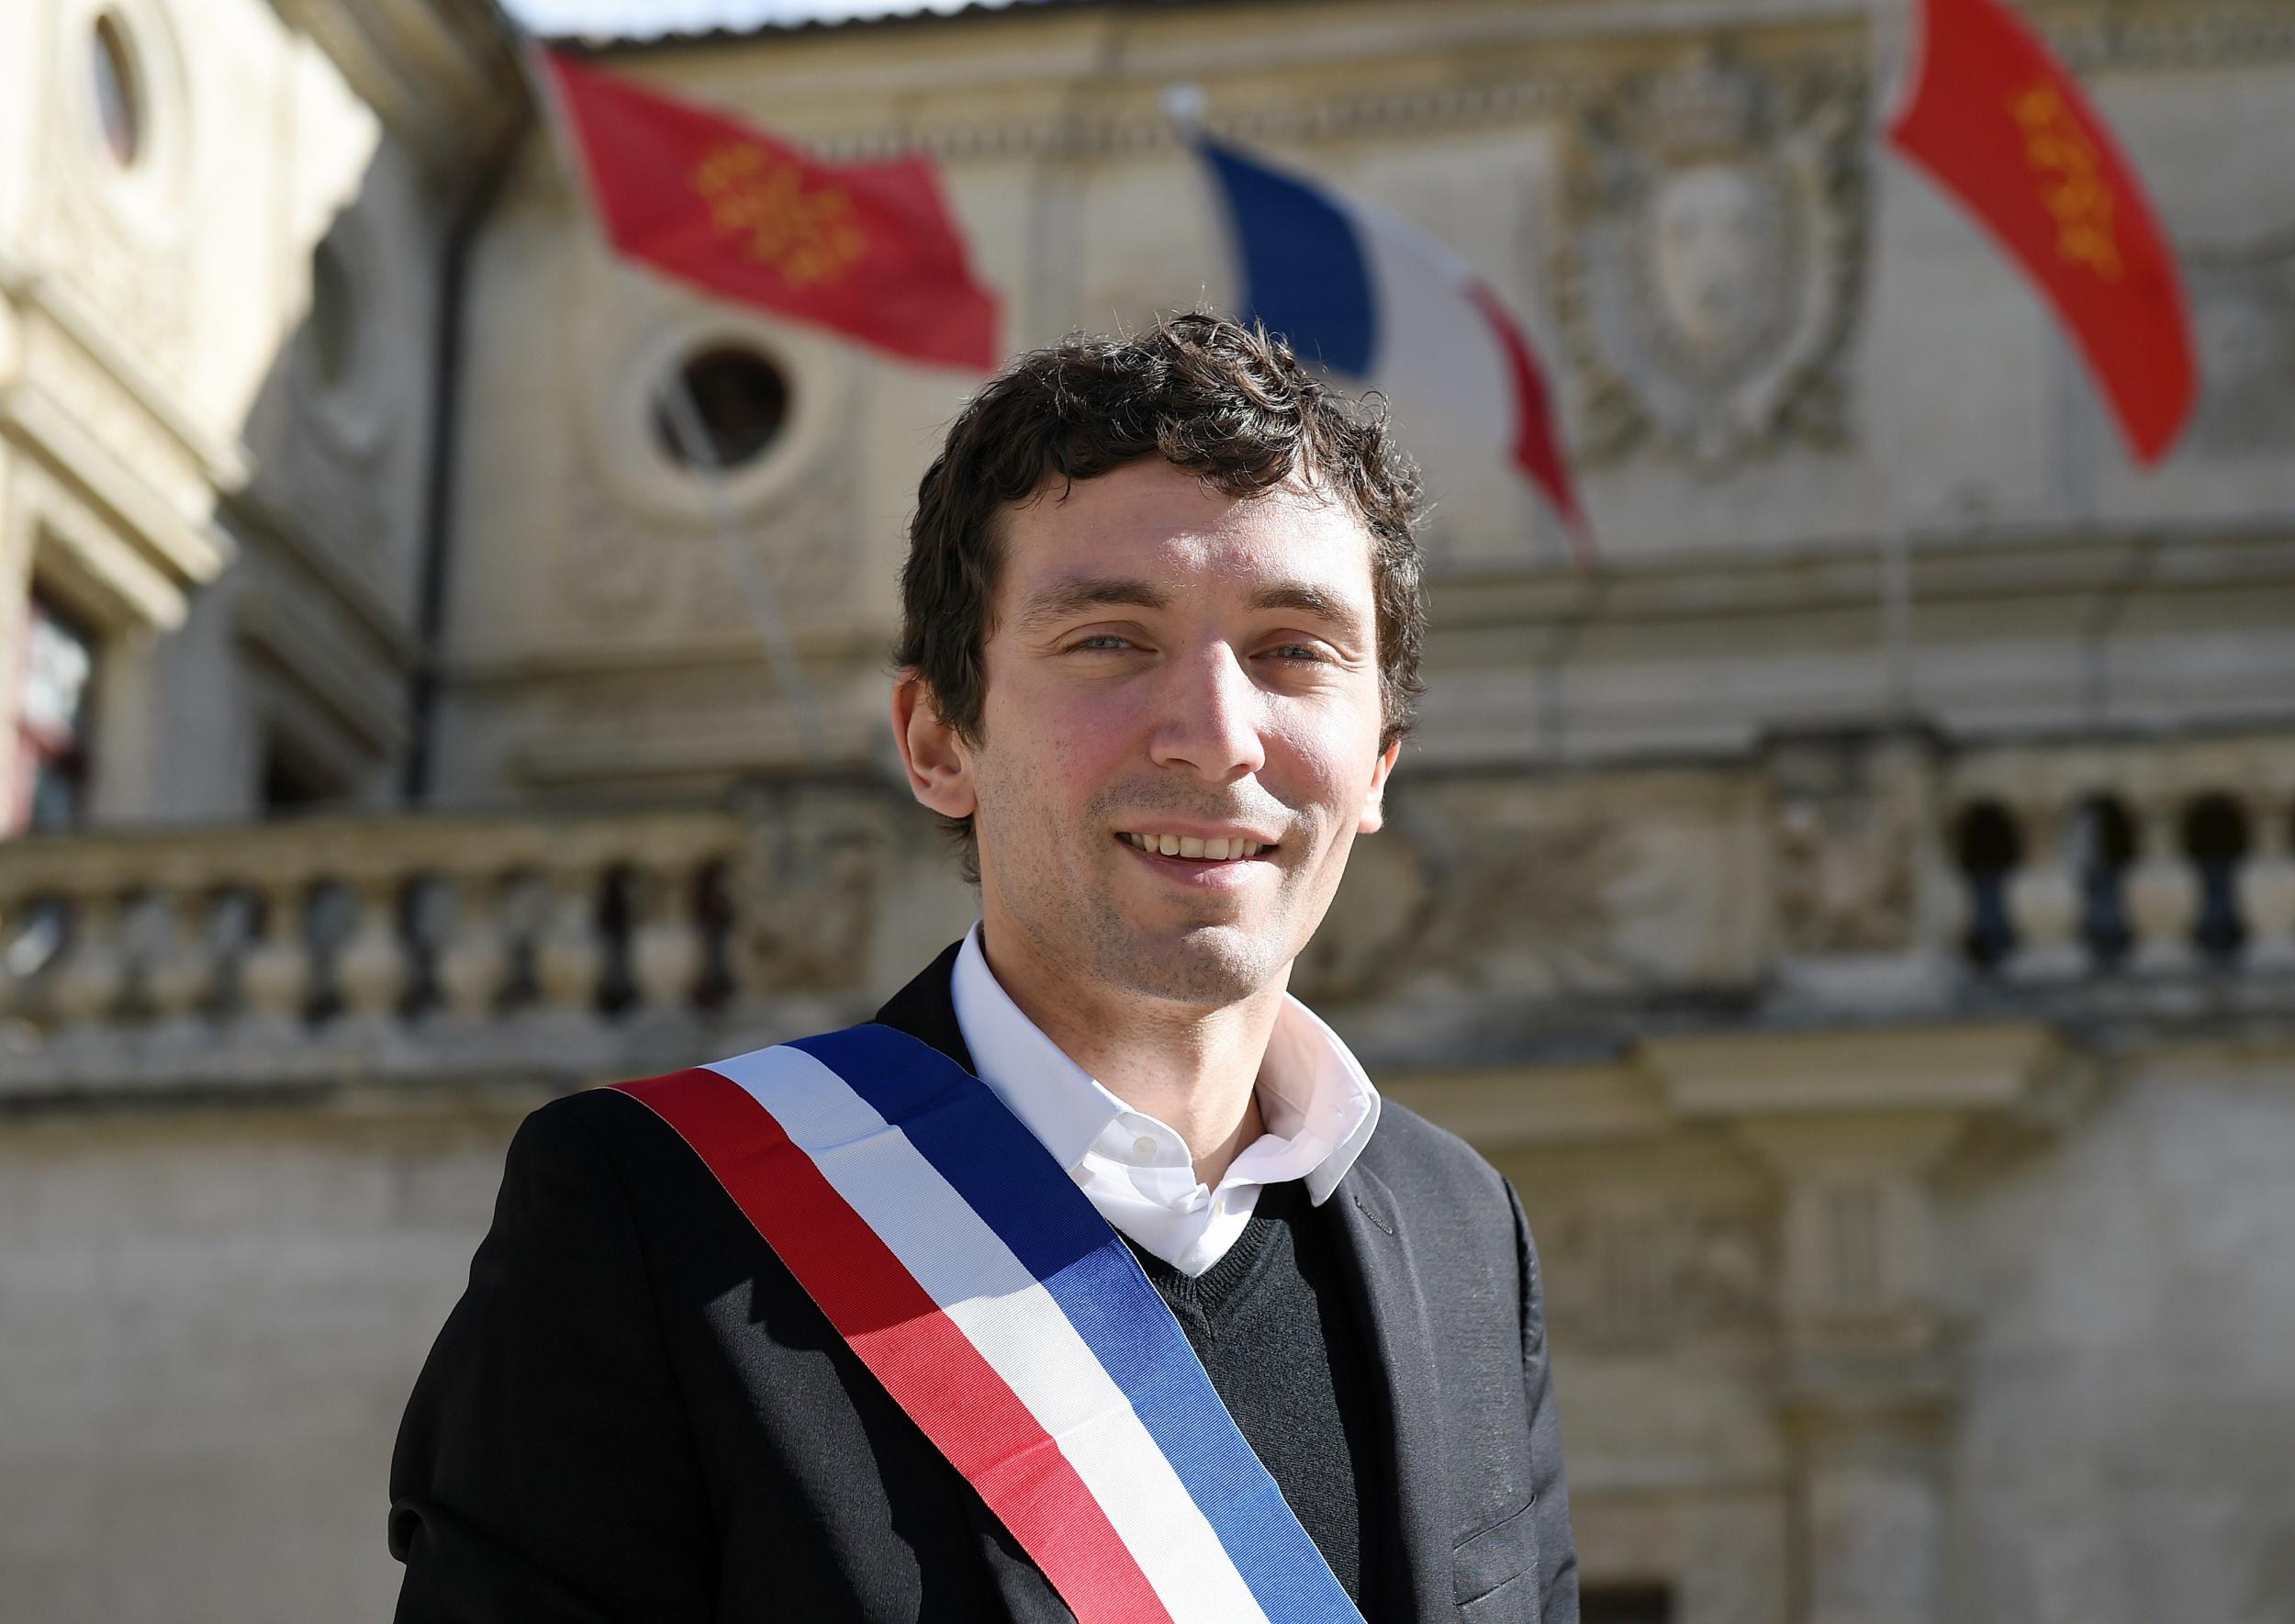 French Front National party mayor of Beaucaire, Julien Sanchez, poses in front of the city hall